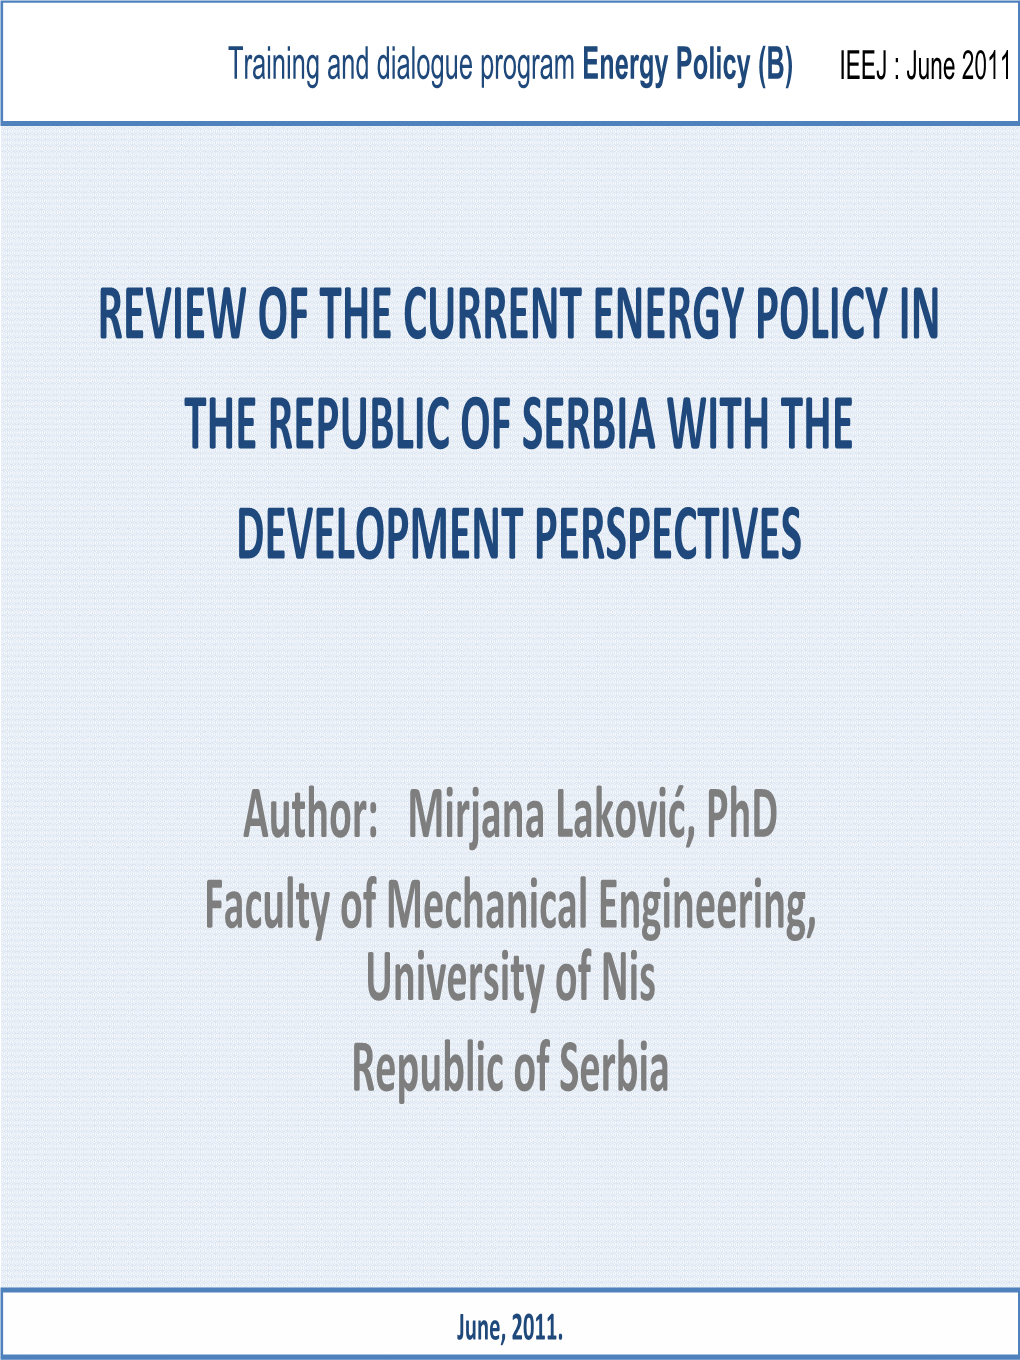 Review of the Current Energy Policy in the Republic of Serbia with the Development Perspectives